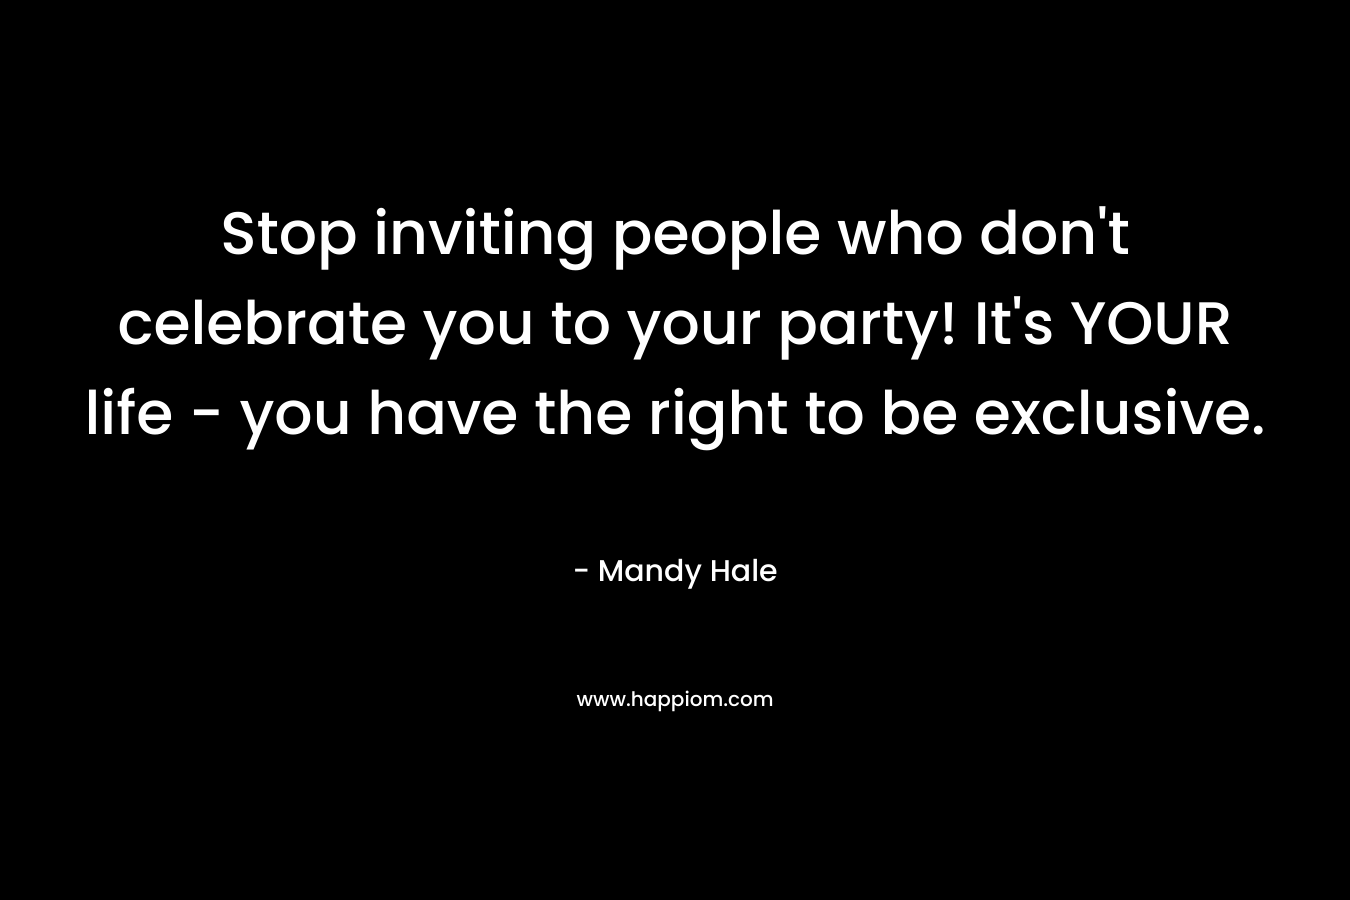 Stop inviting people who don't celebrate you to your party! It's YOUR life - you have the right to be exclusive.